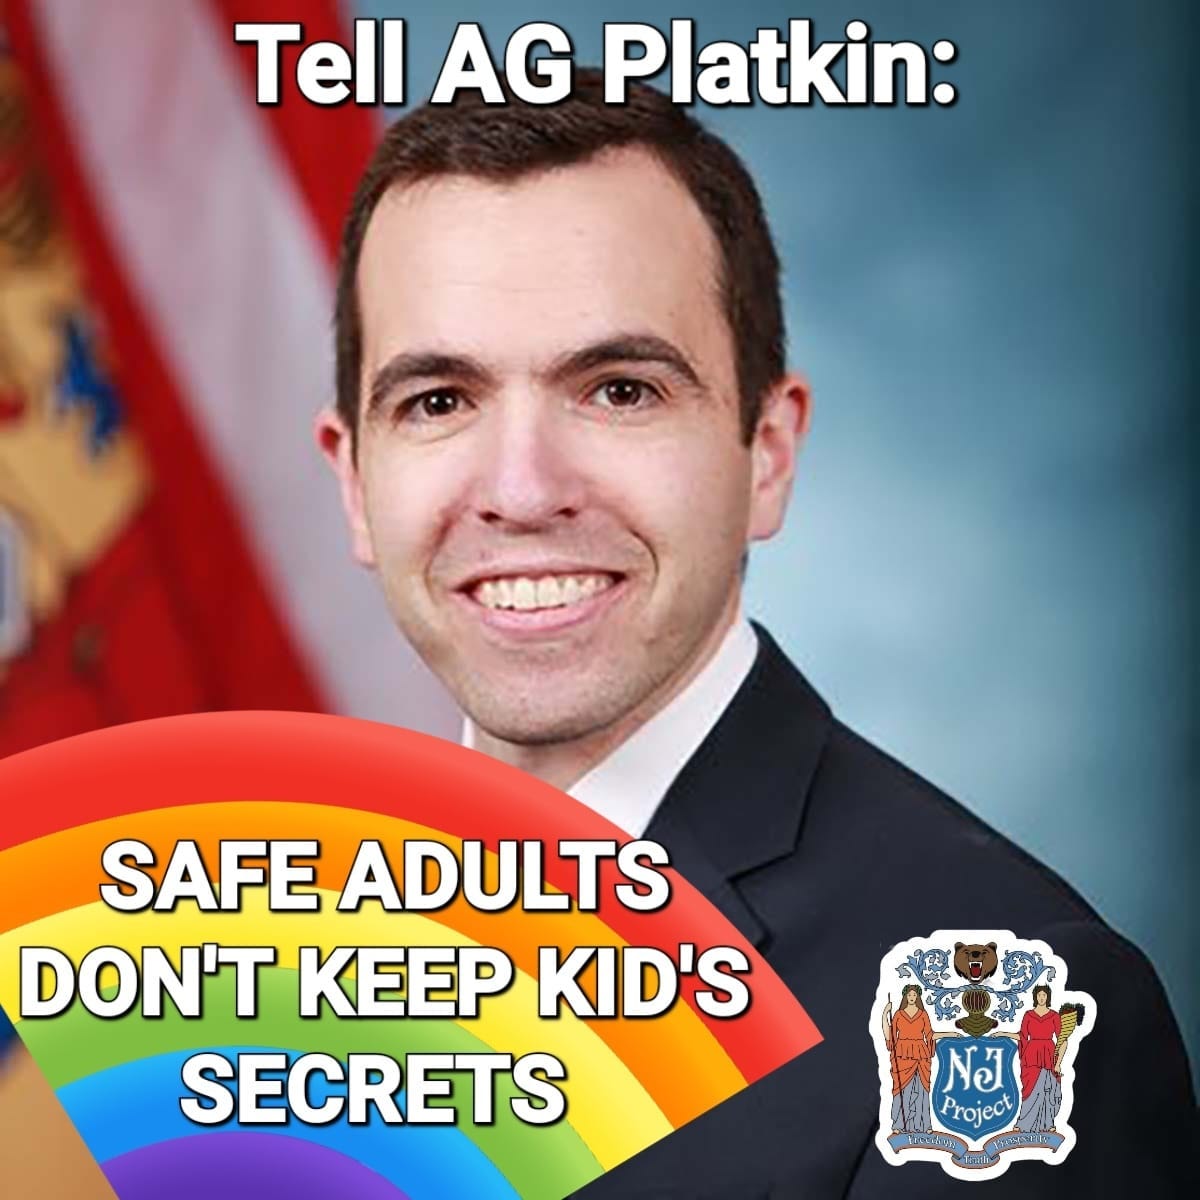 May be an image of 1 person and text that says 'Tell AG Platkin: SAFE ADULTS DON'T KEEP KID'S SECRETS NJI Project'